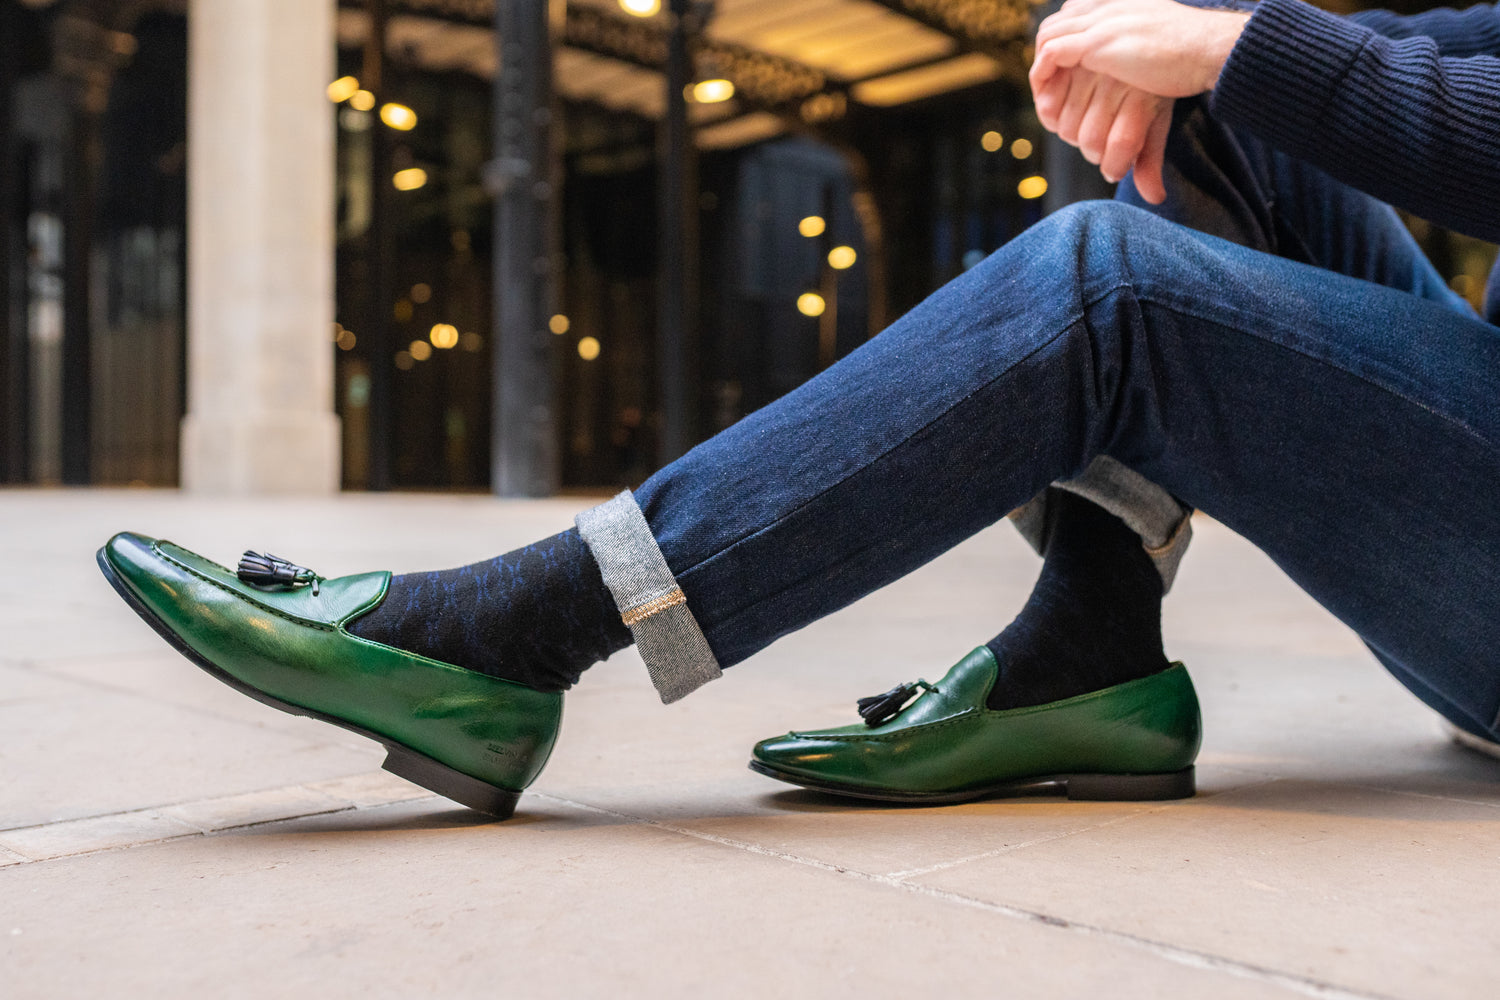 Men's loafers and socks: how to wear with – Melvin & Hamilton